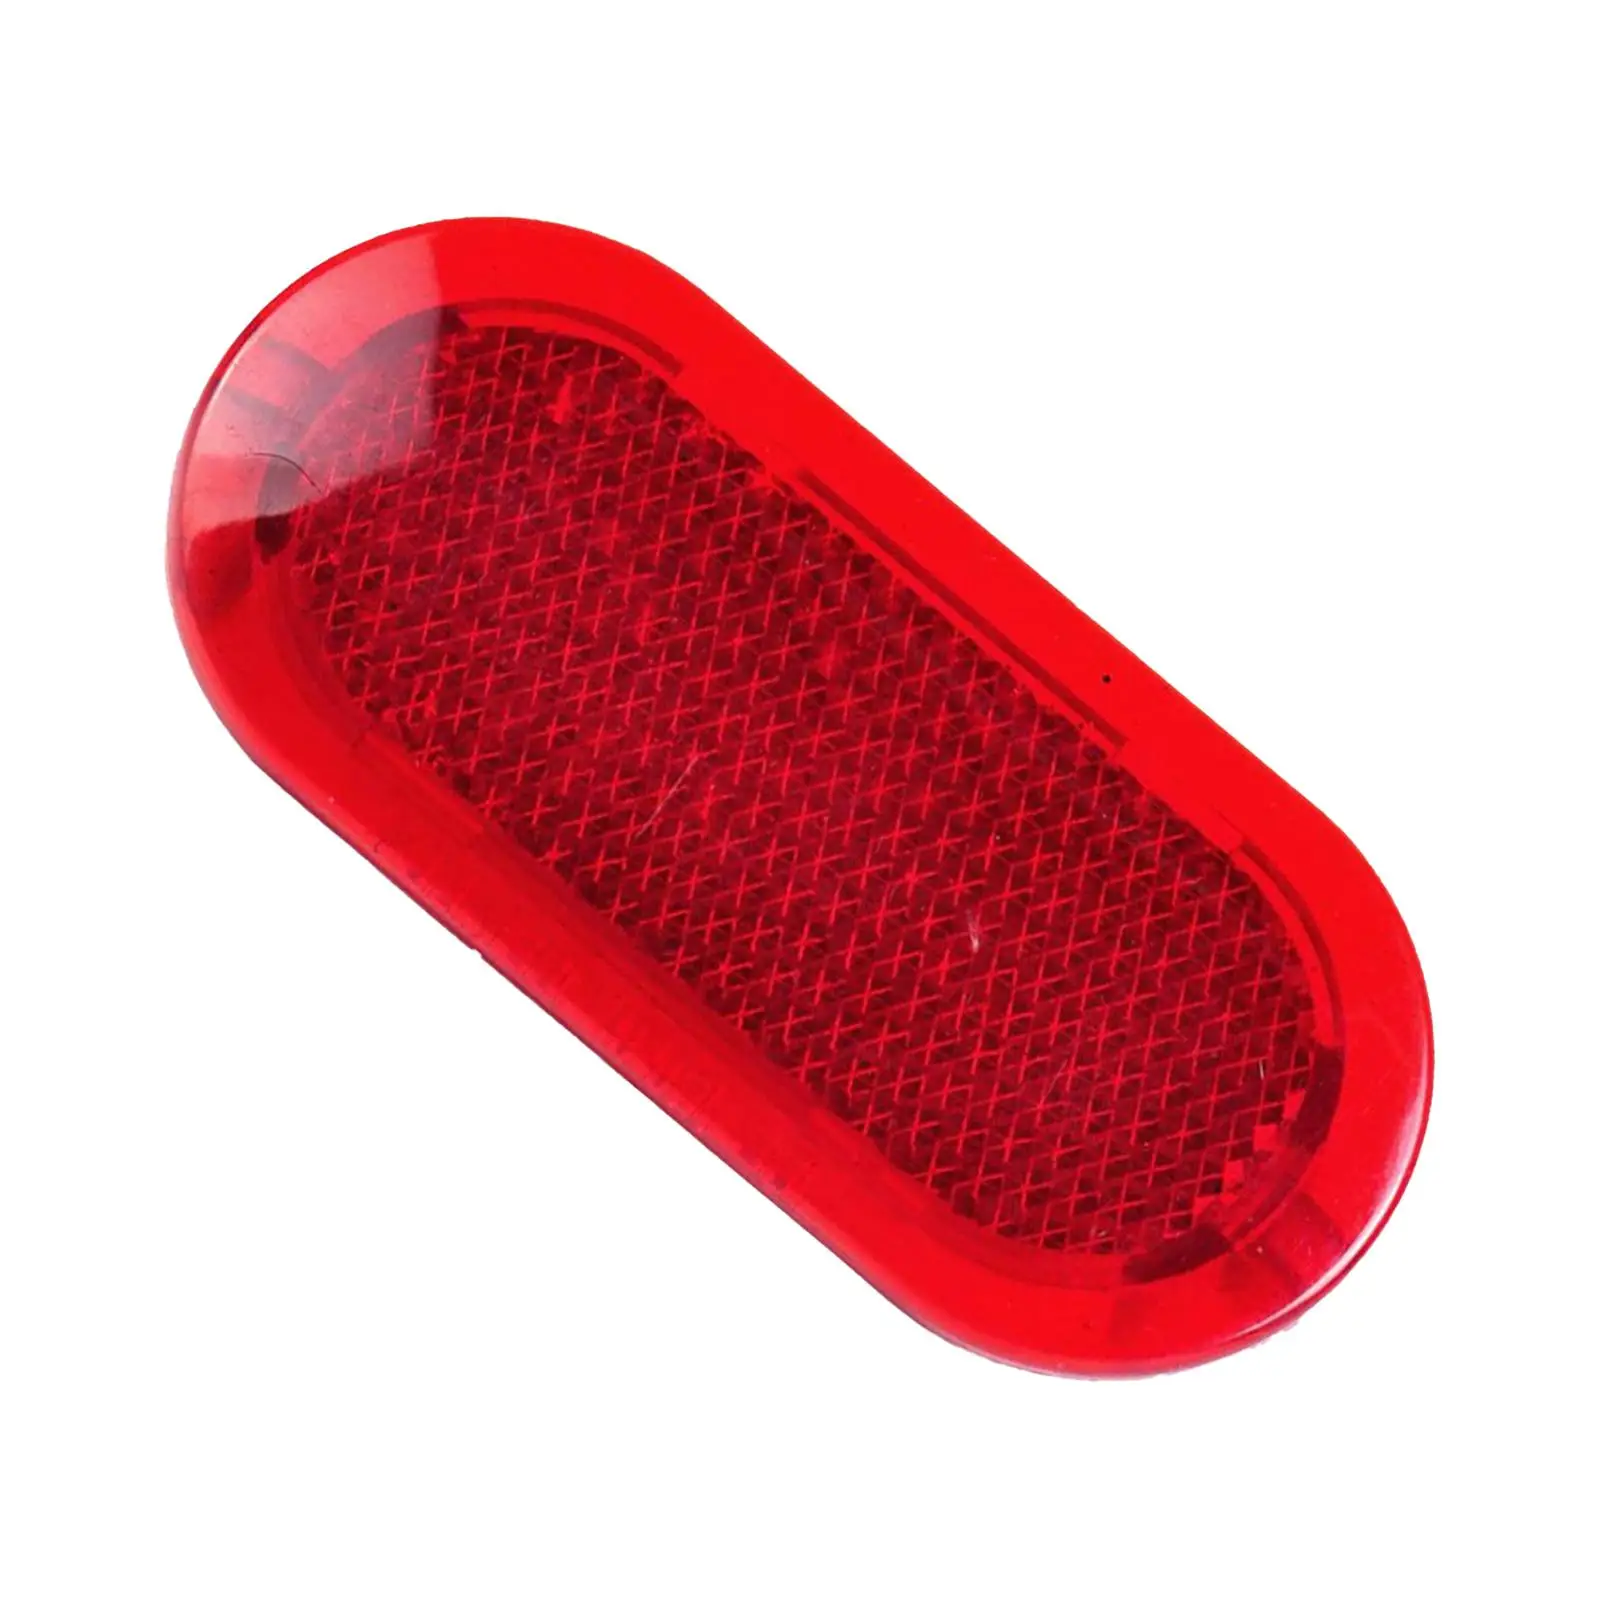 Door Panel Warning Light Reflector Red 6Q0947419 for VW Touran Touran Accessory Easy Installation